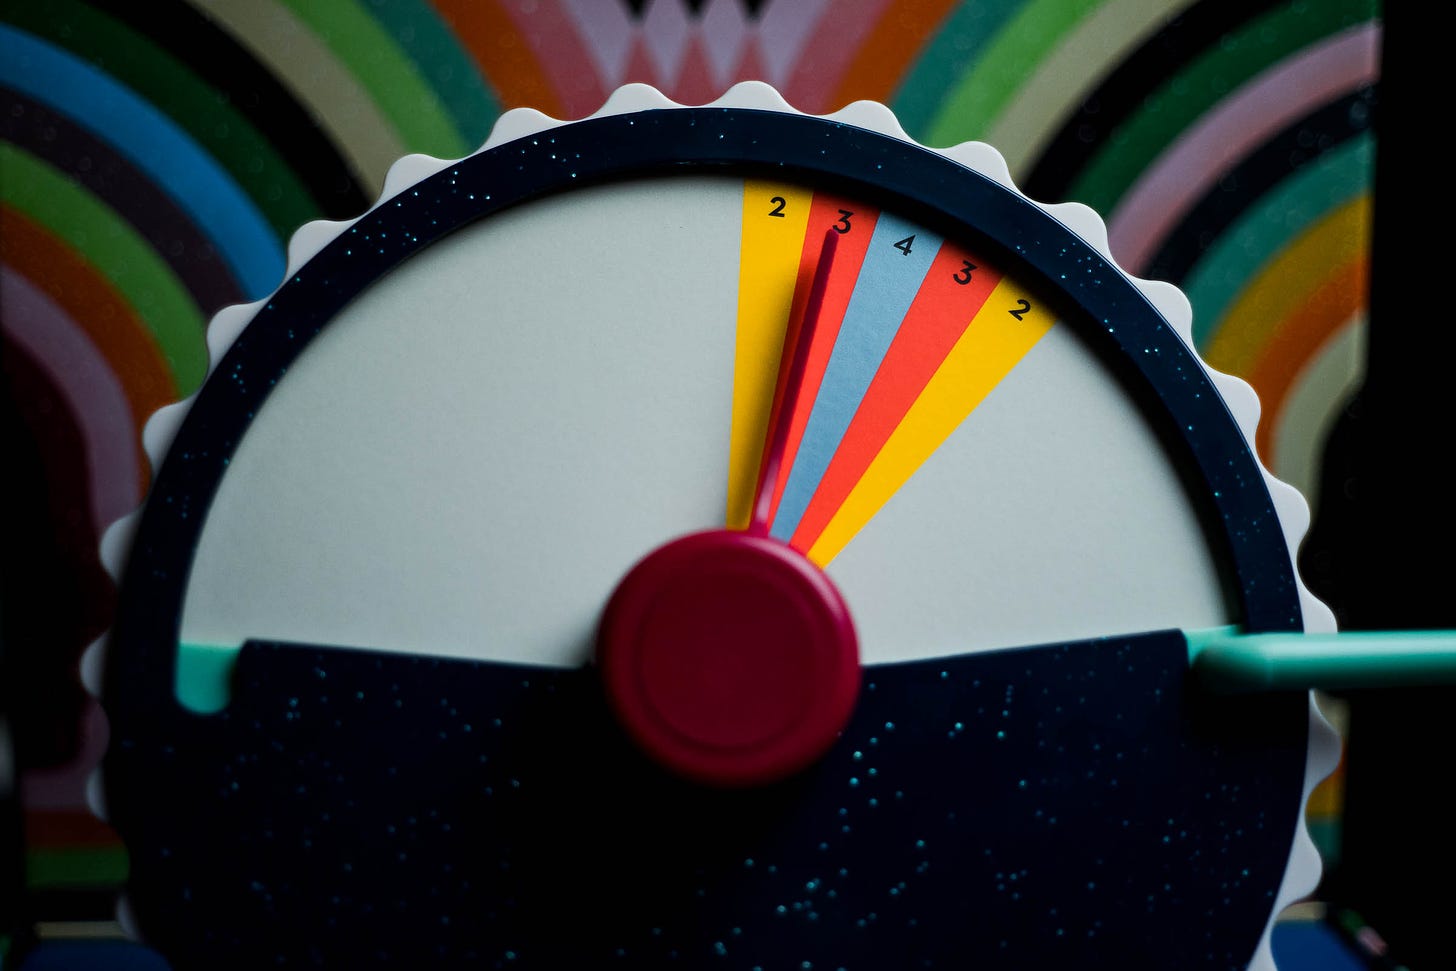 The dial from the game Wavelength on a table. The target is slightly to the right of center.